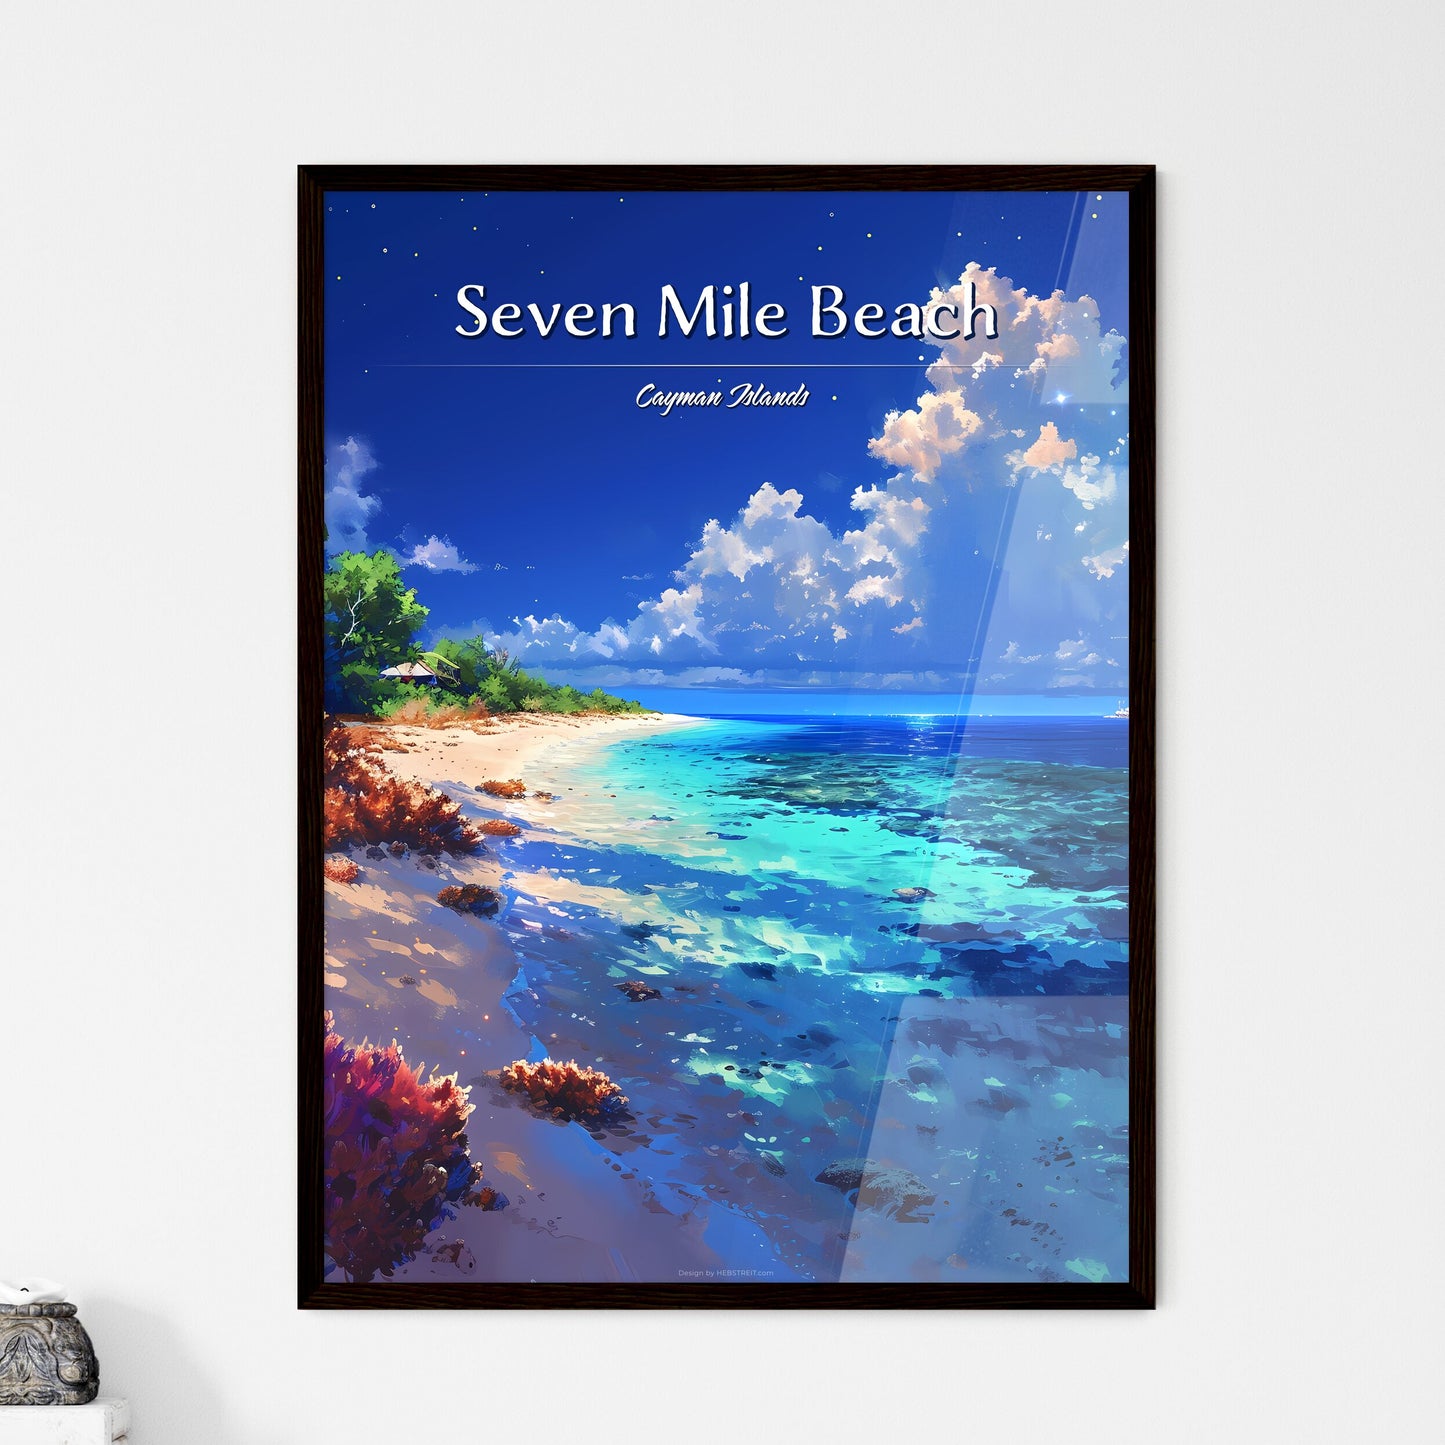 Seven Mile Beach, Cayman Islands - Art print of a beach with trees and blue water Default Title